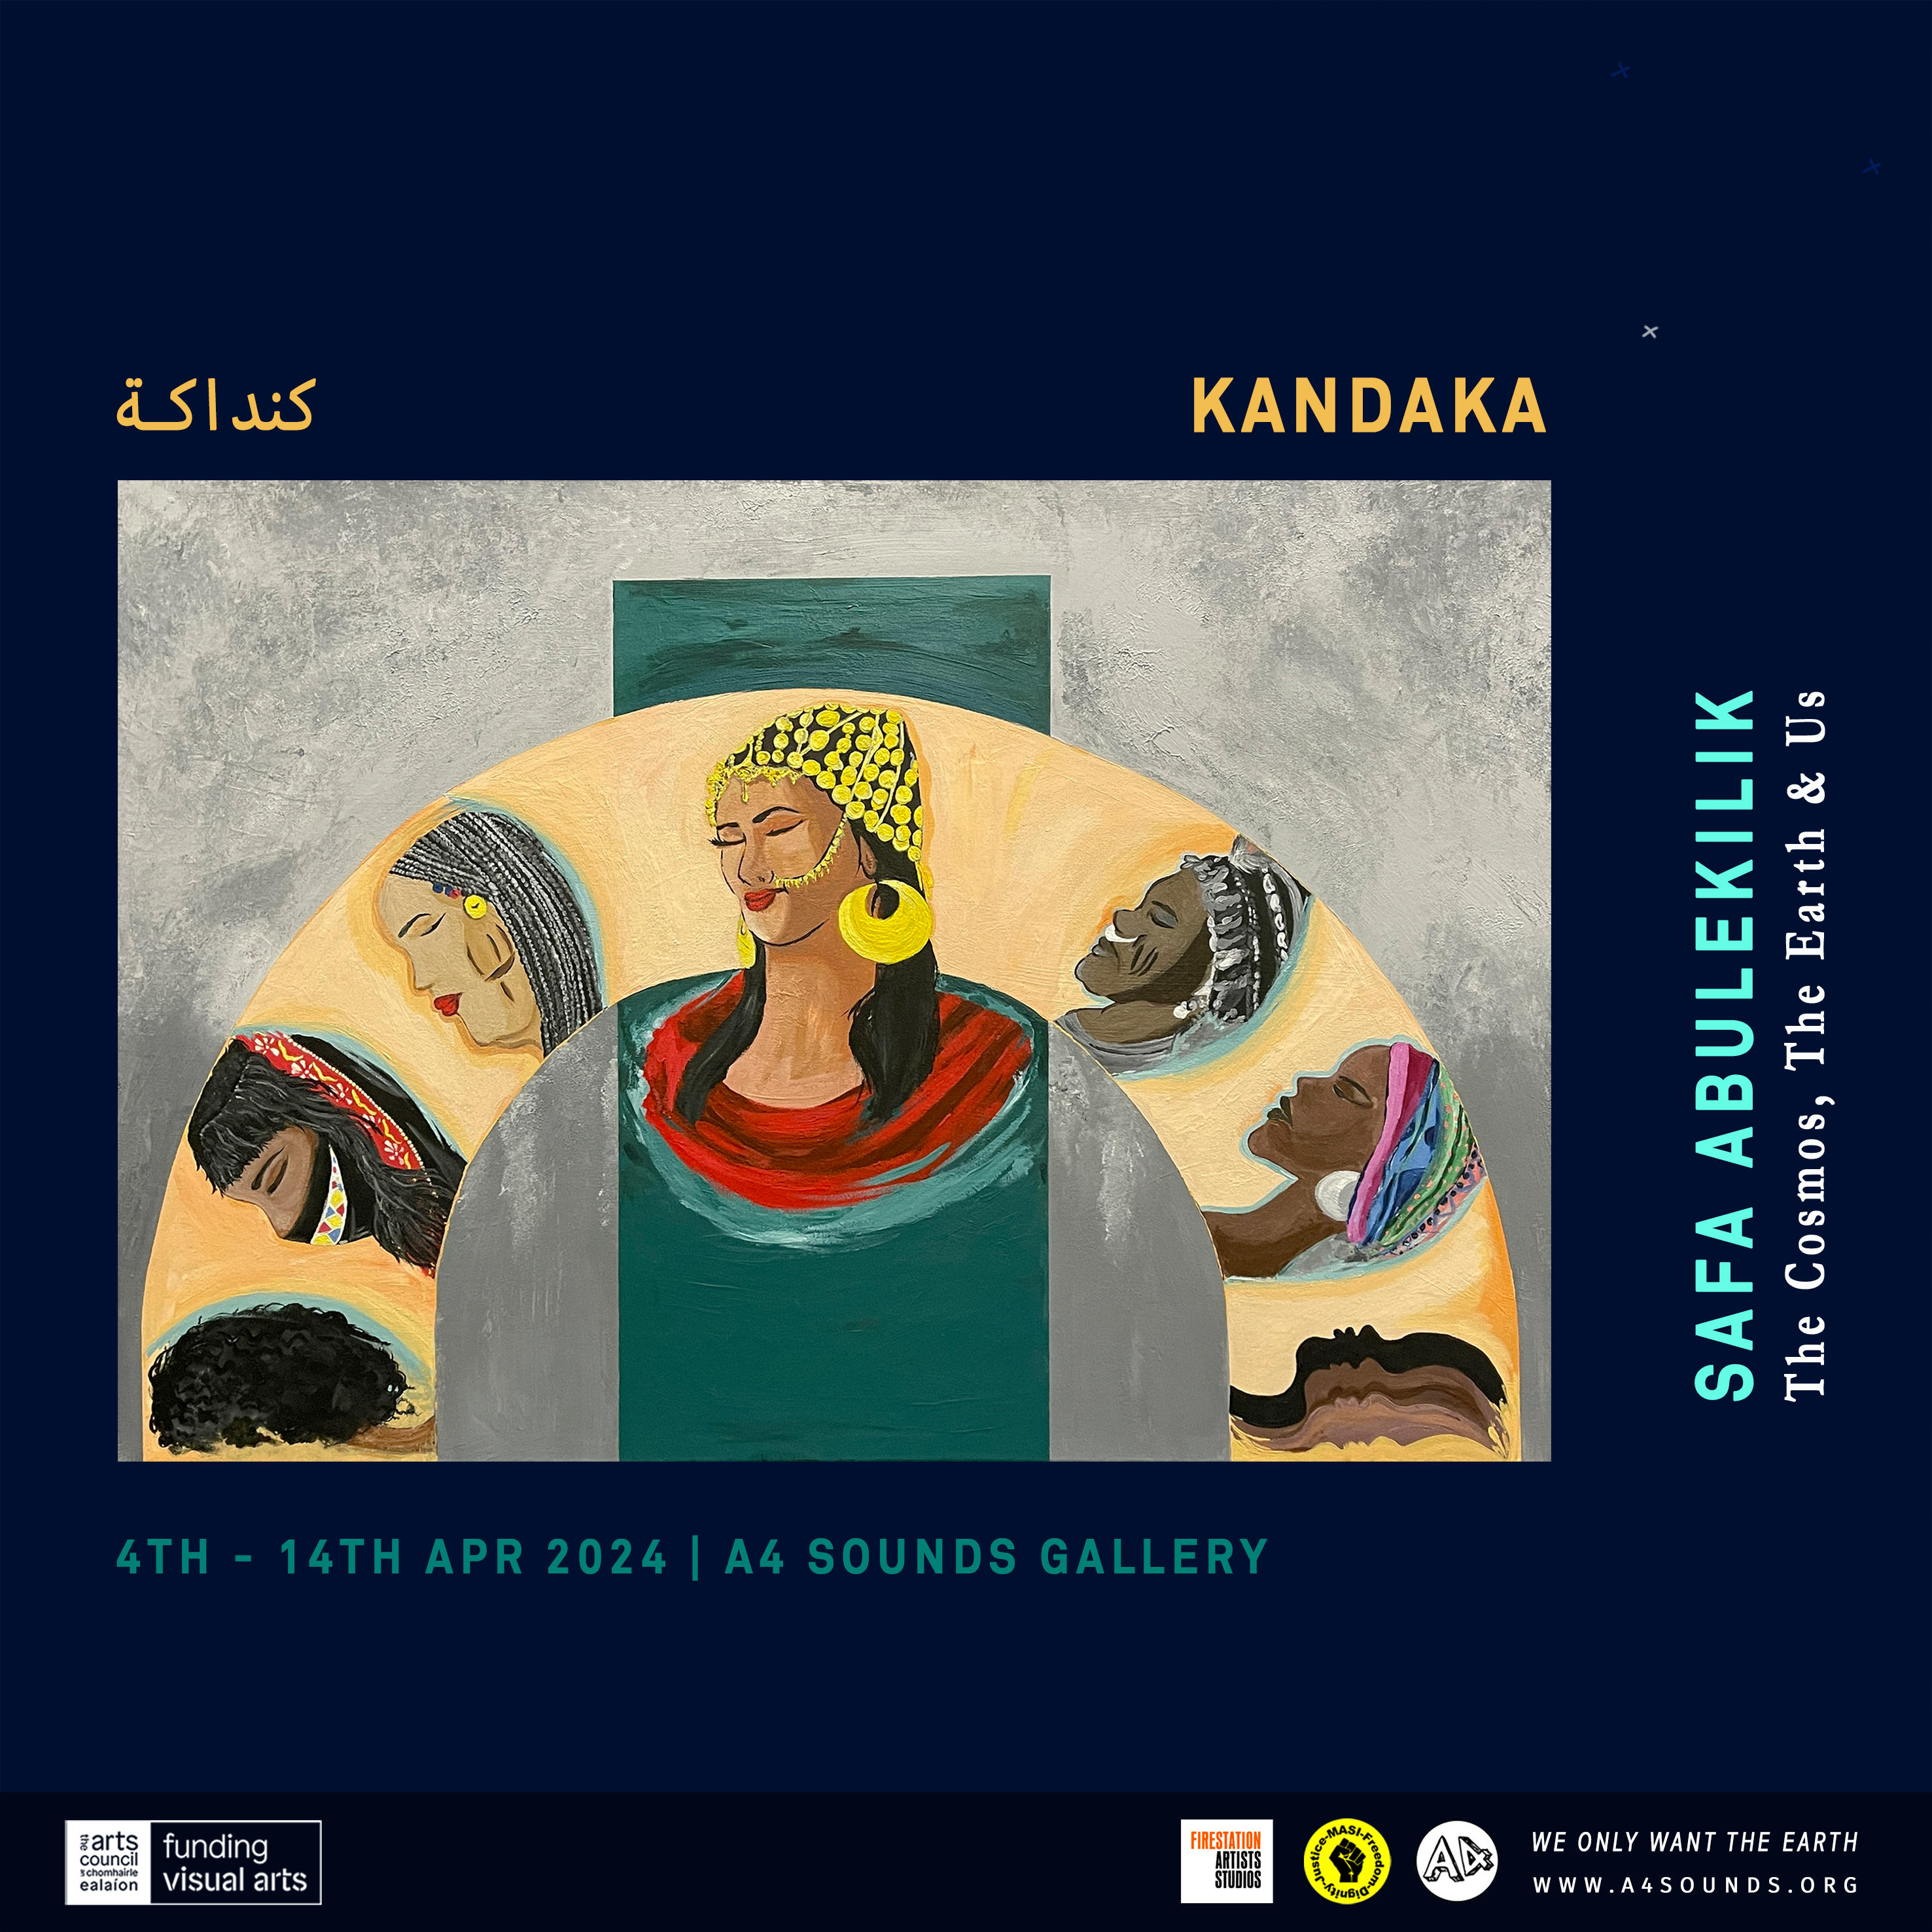 Poster for the exhibtion Kandaka. A dark blue poster with yellow test of the name of the exhibition in English and Arabic. In the centre is an image of a painting from the exhibition. The painting has a grey textured background with a gold semi circle laid horizontally and a green rectangle vertically behind. Along the gold semi circle are profile paintings of Sudanese women. They are wearing different hairstyles, jewellery and headwear.